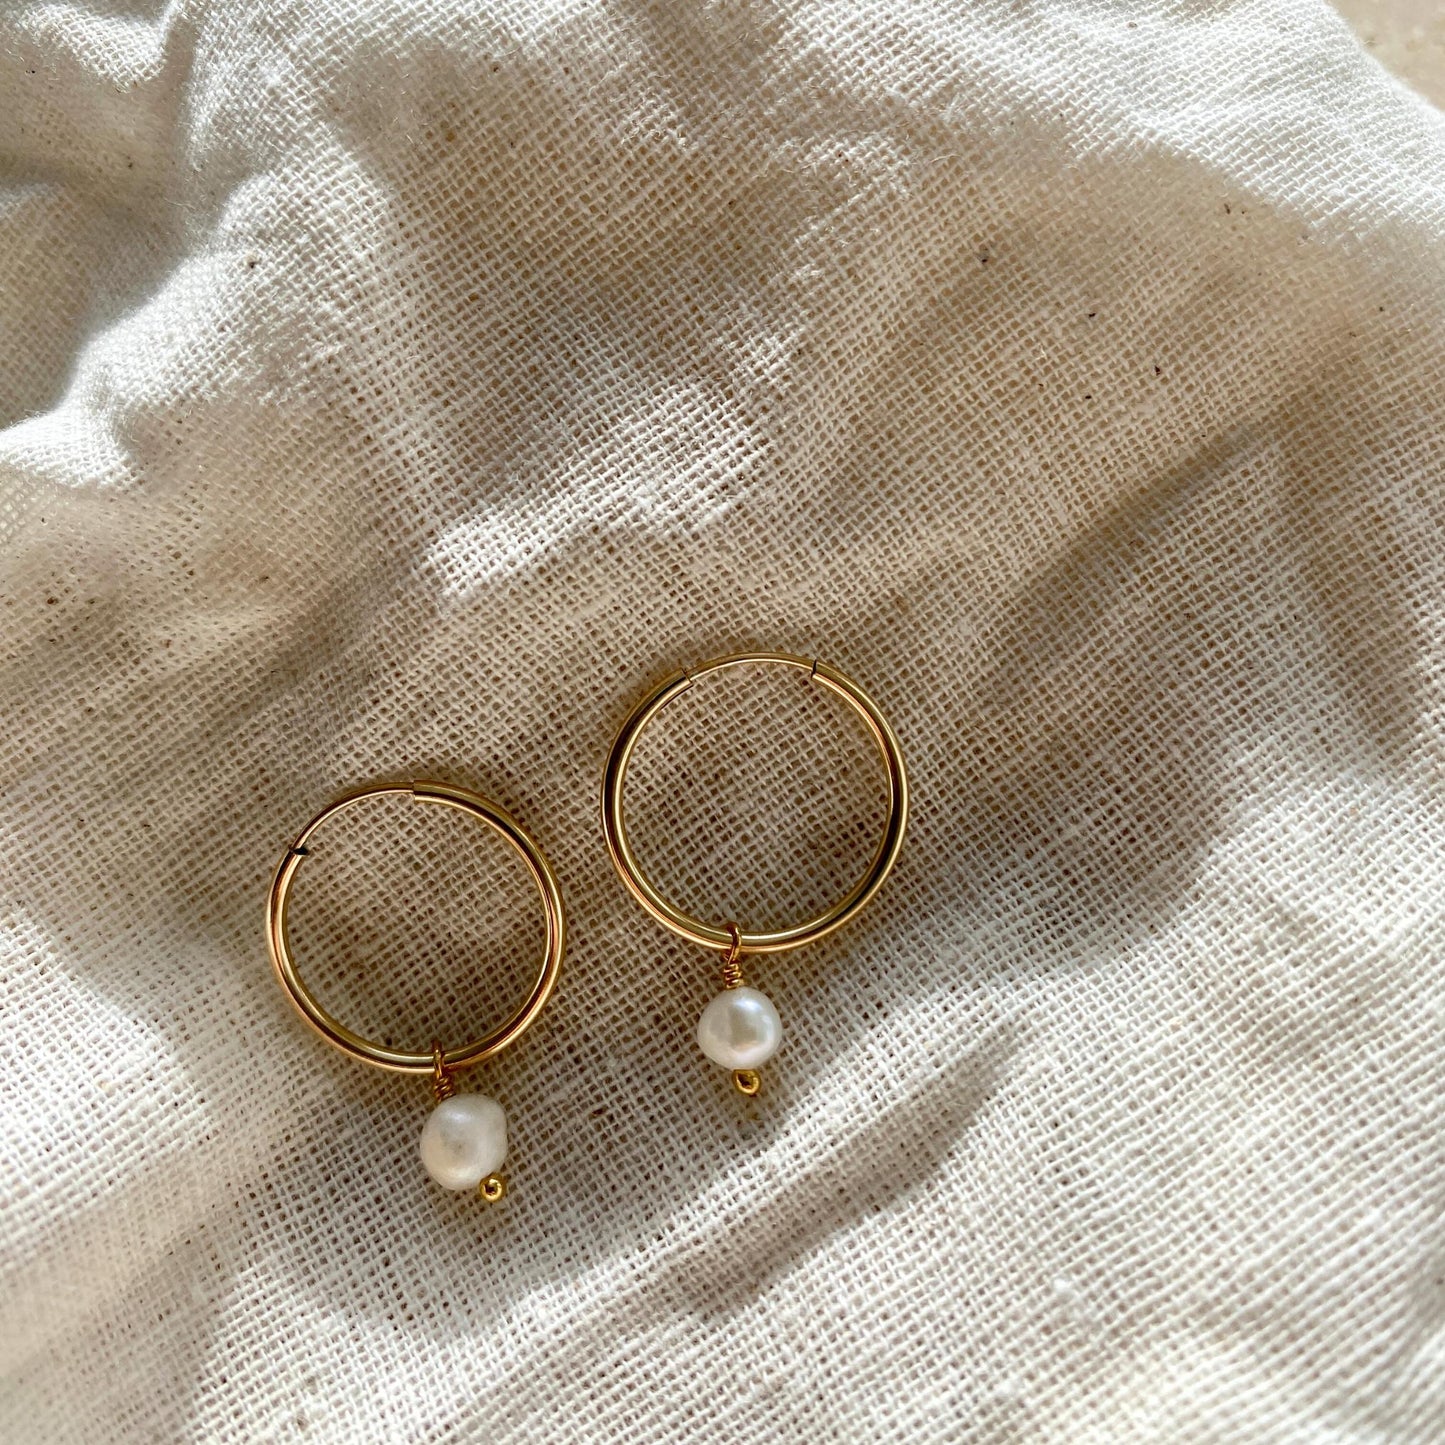 Tiny Freshwater Pearl Hoop Earrings | Calm (Gold Fill or Silver)